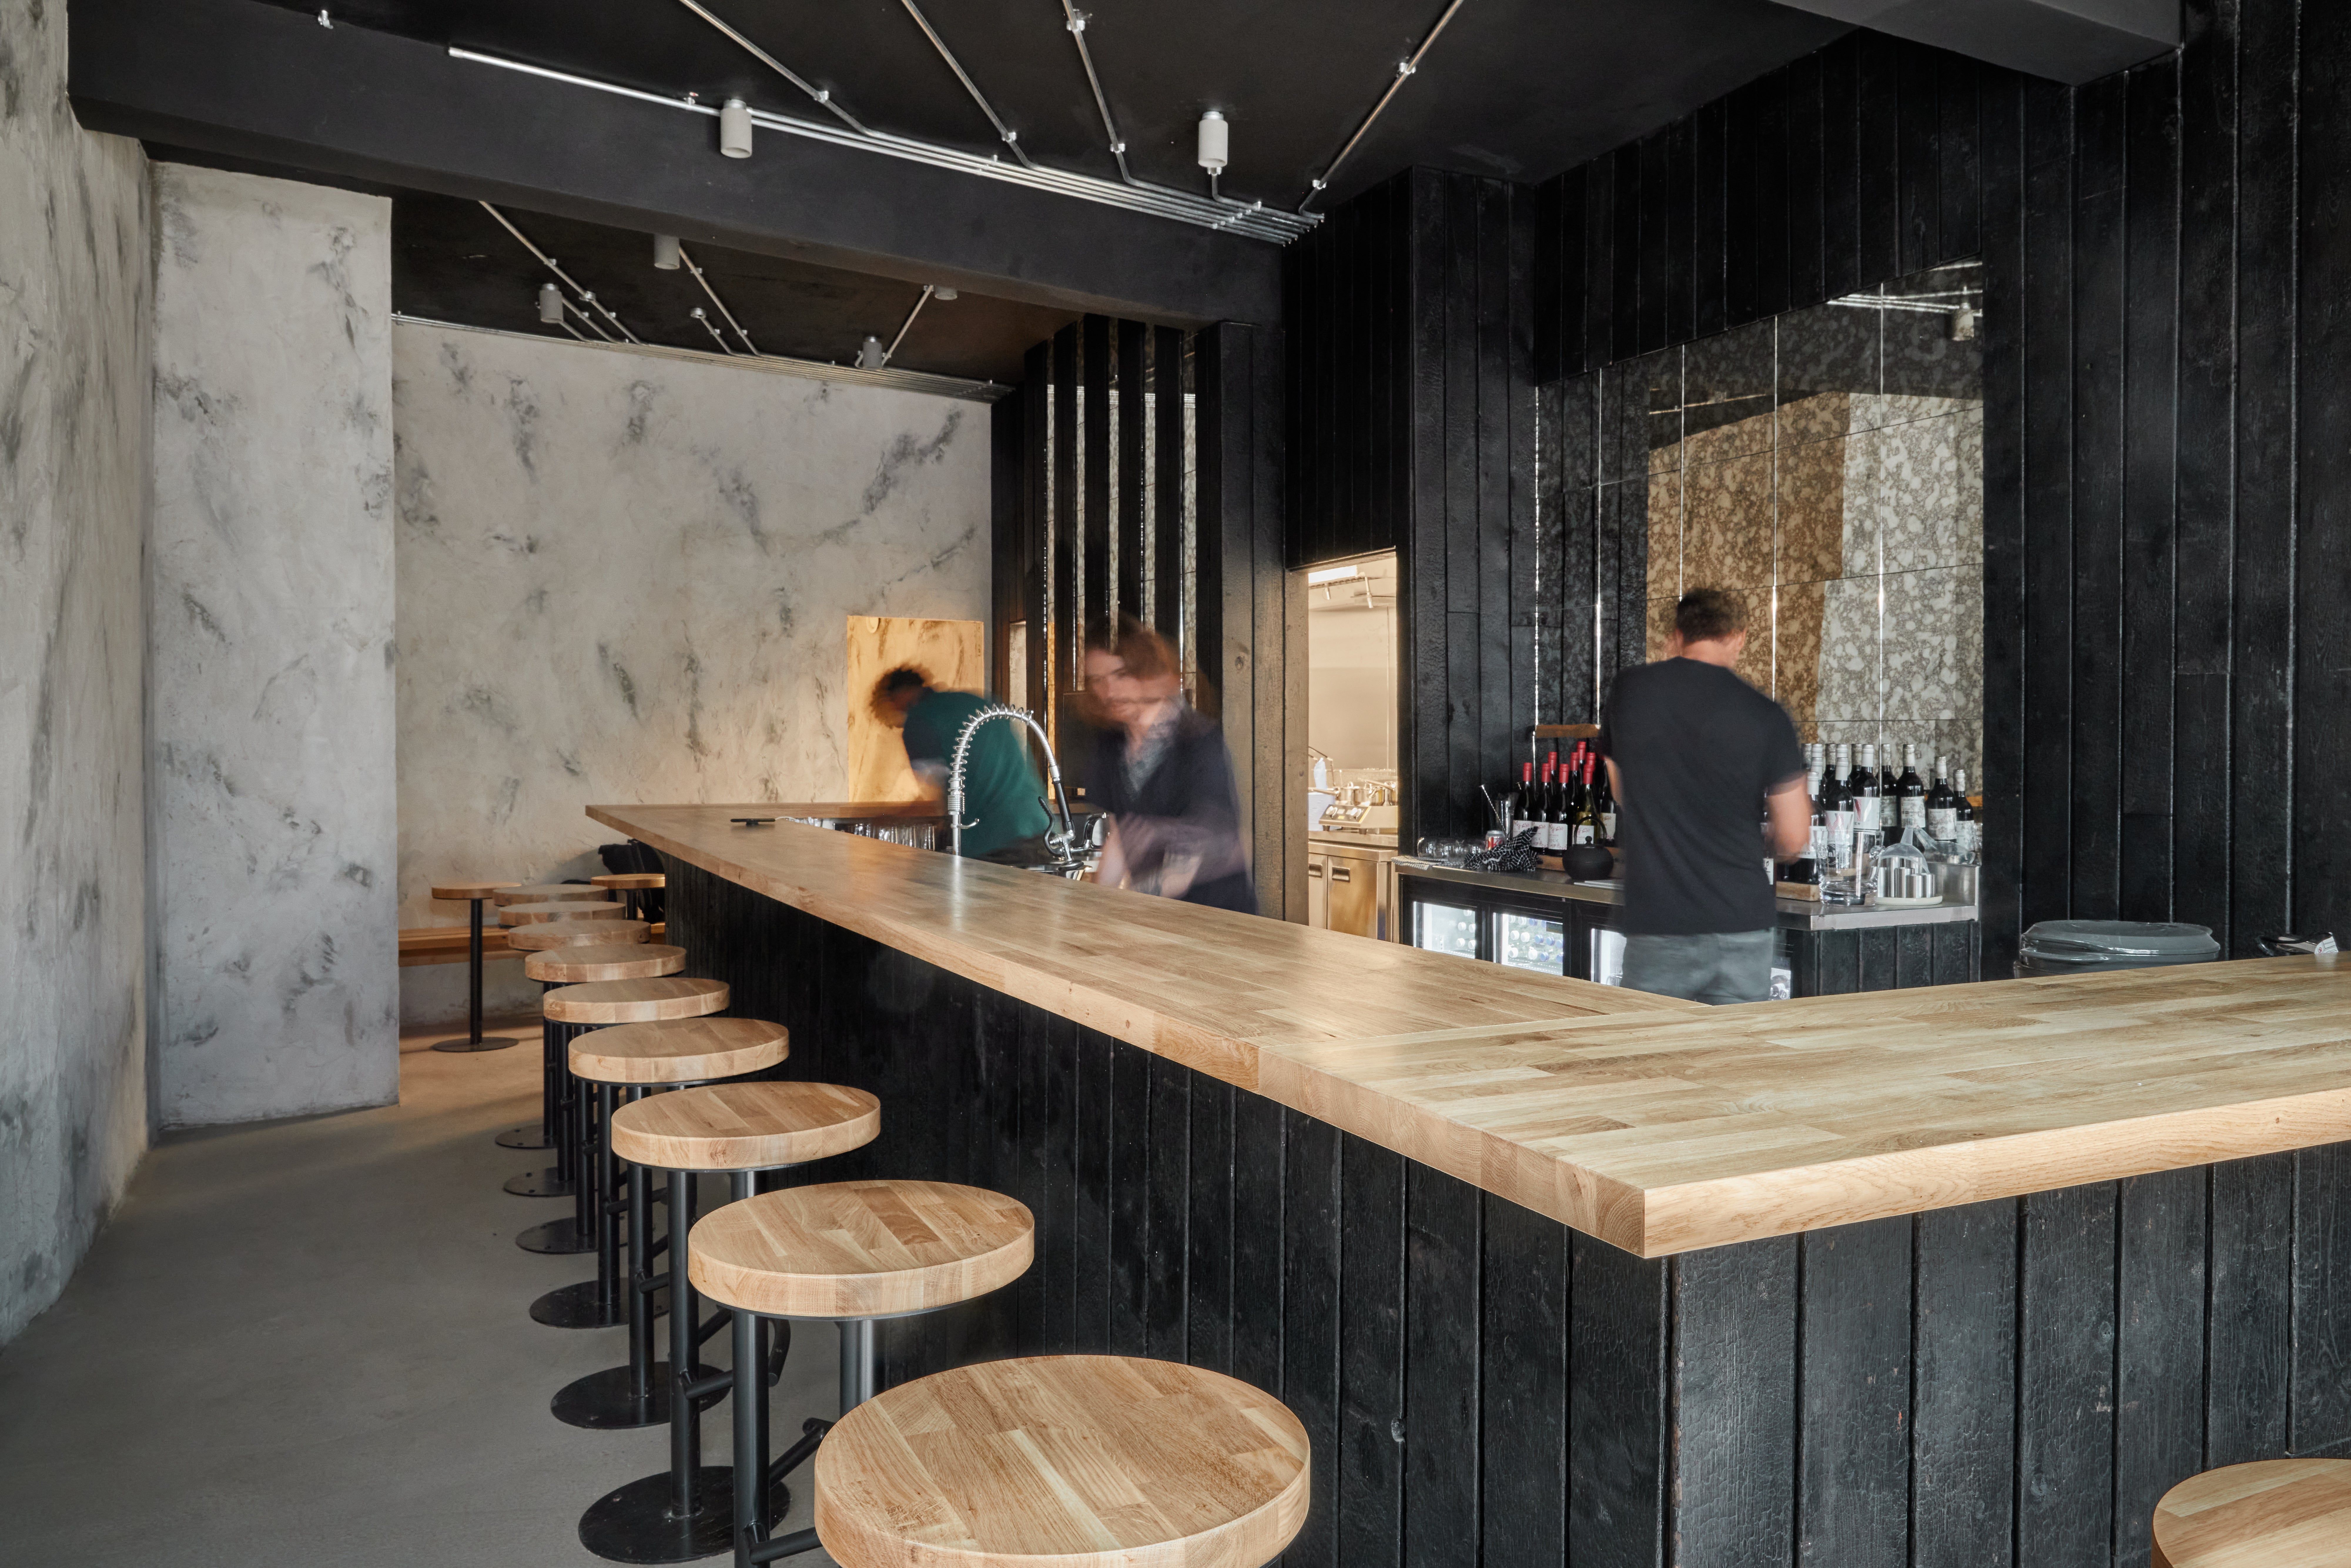 The counter-style seating echoes the style of Japanese restaurants found in New Zealand